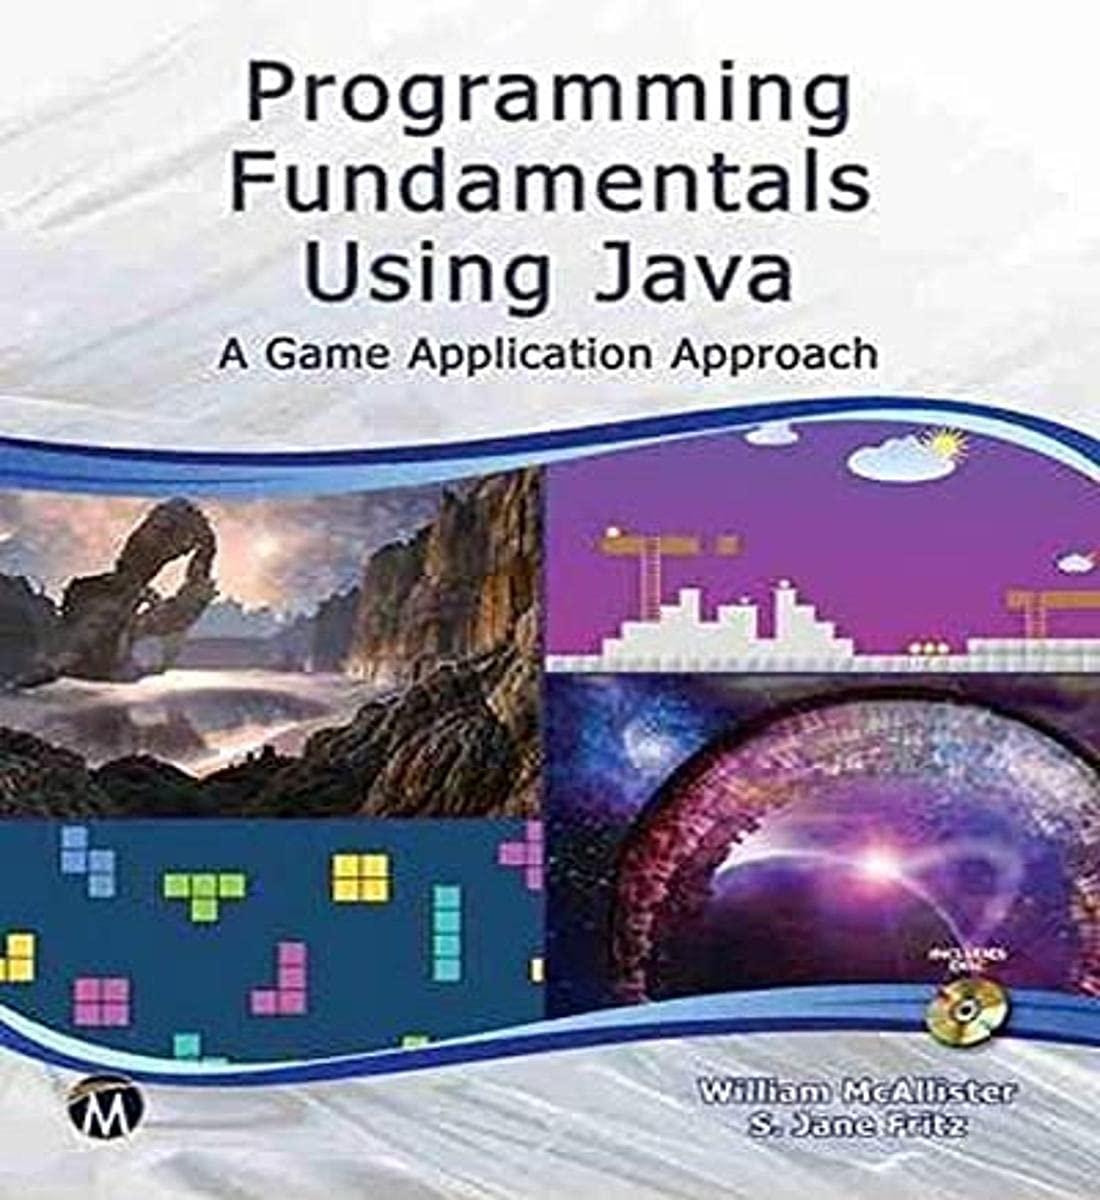 programming fundamentals using java a game application approach 1st edition william mcallister, s. jane fritz